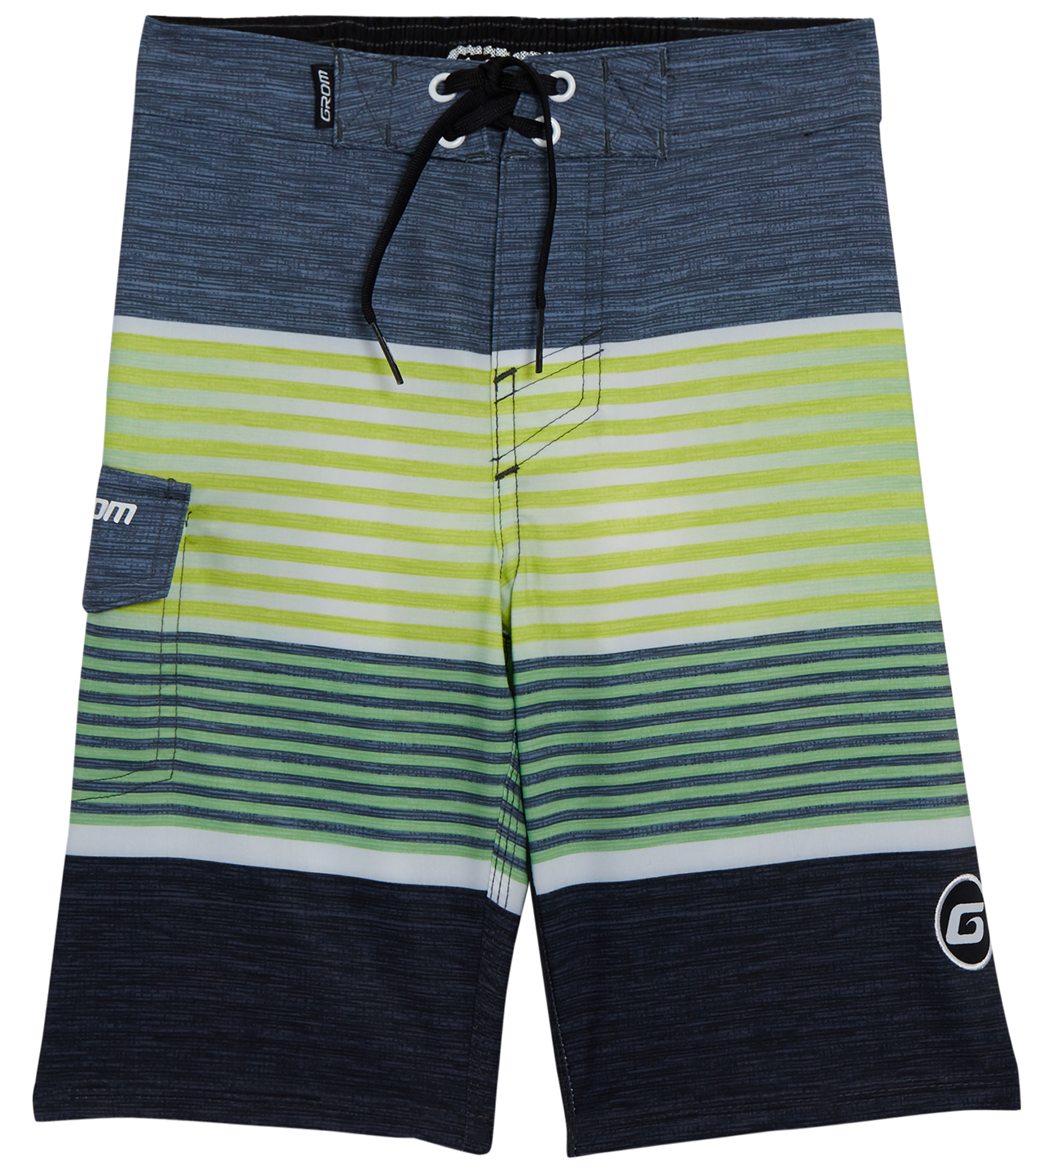 Grom Boys' South Swell Board Short - Green X-Small - Swimoutlet.com